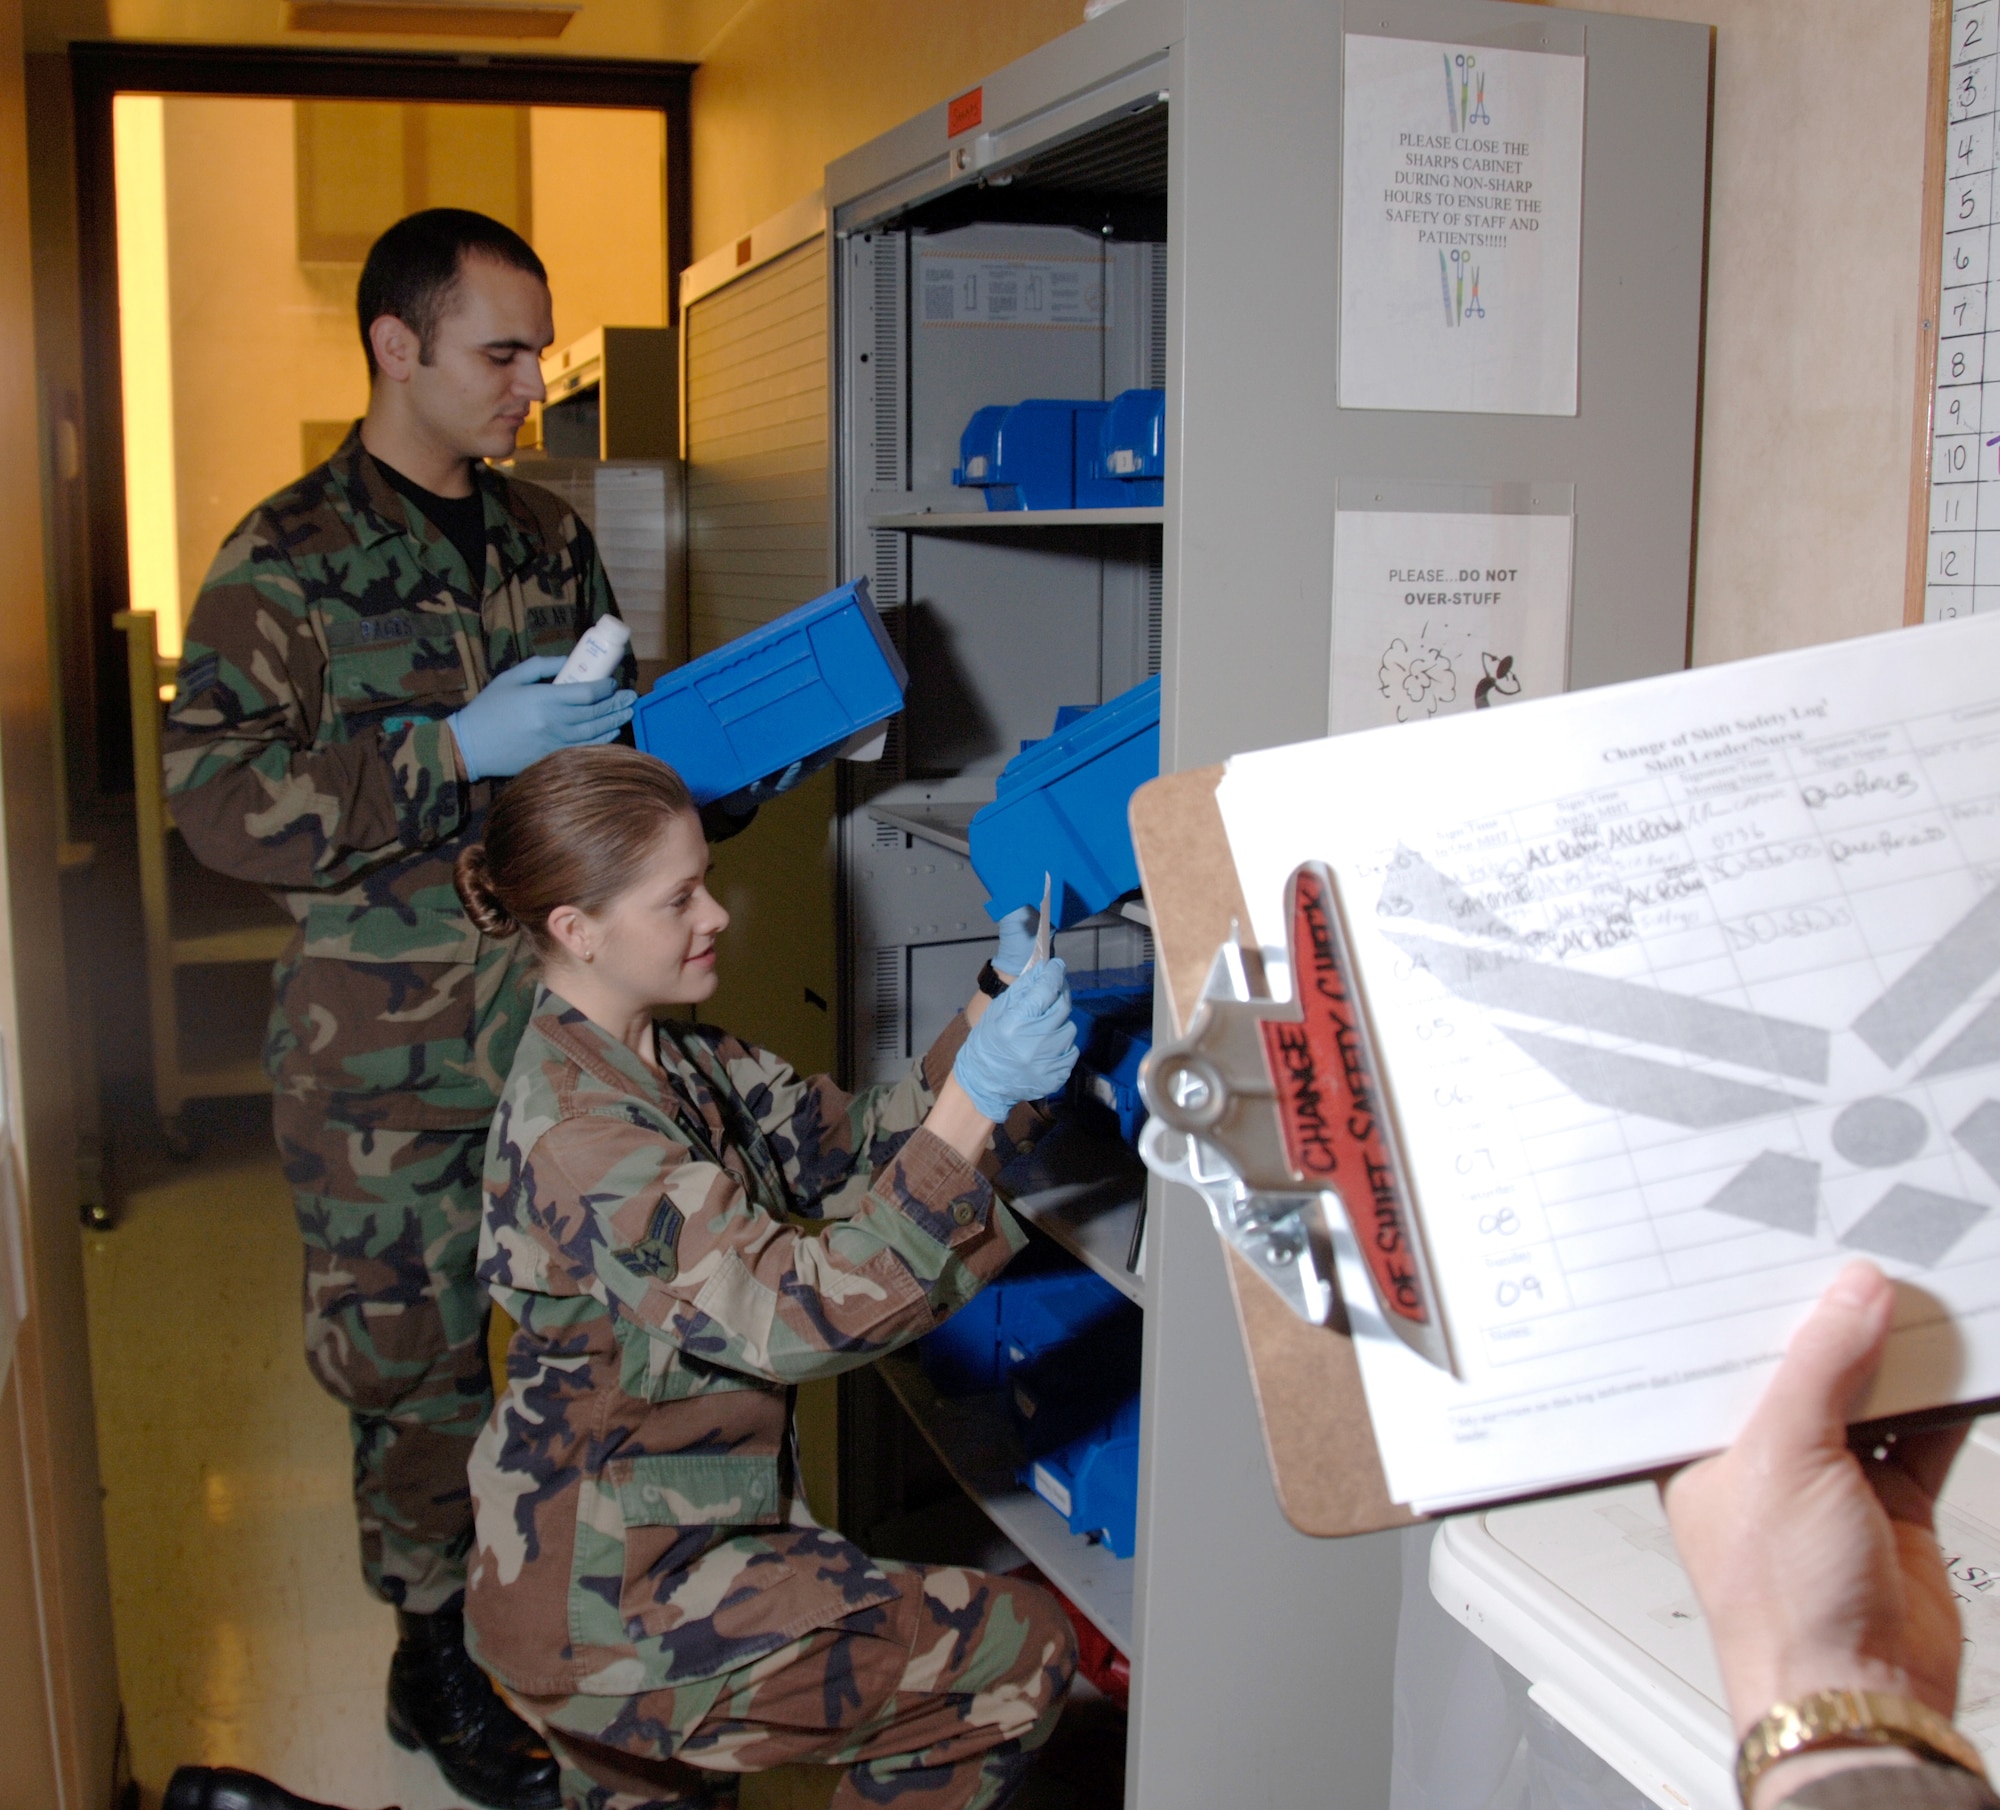 Airman First Class Leah Bolen (right) and Senior Airman Gustavo Pages (left) perform shift change safety checks on the mental health ward at Wilford Hall Medical Center Dec. 5.  Safety checks are done each day prior to shift change to ensure the well being of staff and patients. Airmen Bolen and Pages, are mental health technicians assigned the 59th Mental Health Squadron. (U.S. Air Force photo/Master Sgt. Kimberly A Yearyean-Siers)